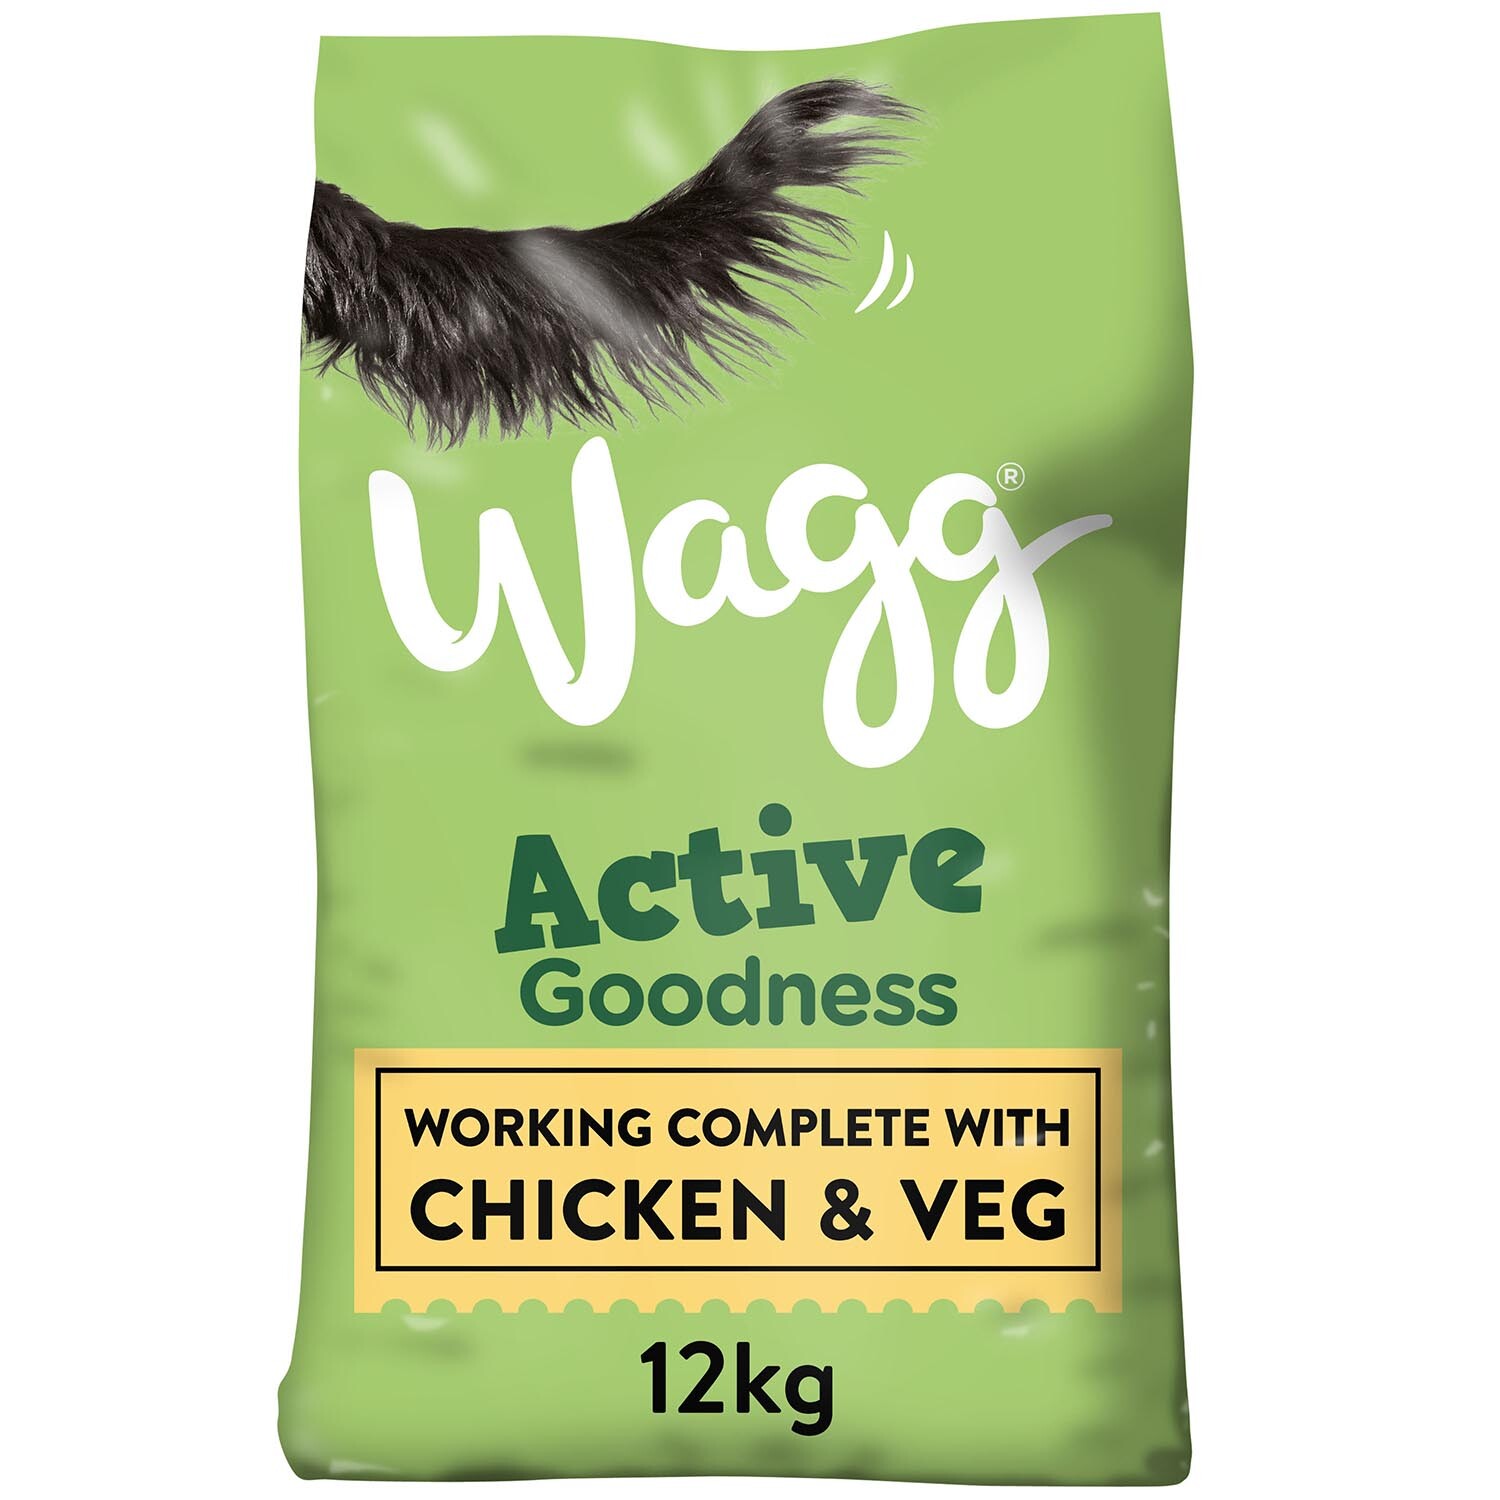 Wagg Active Goodness Chicken and Veg Dry Dog Food 12kg Image